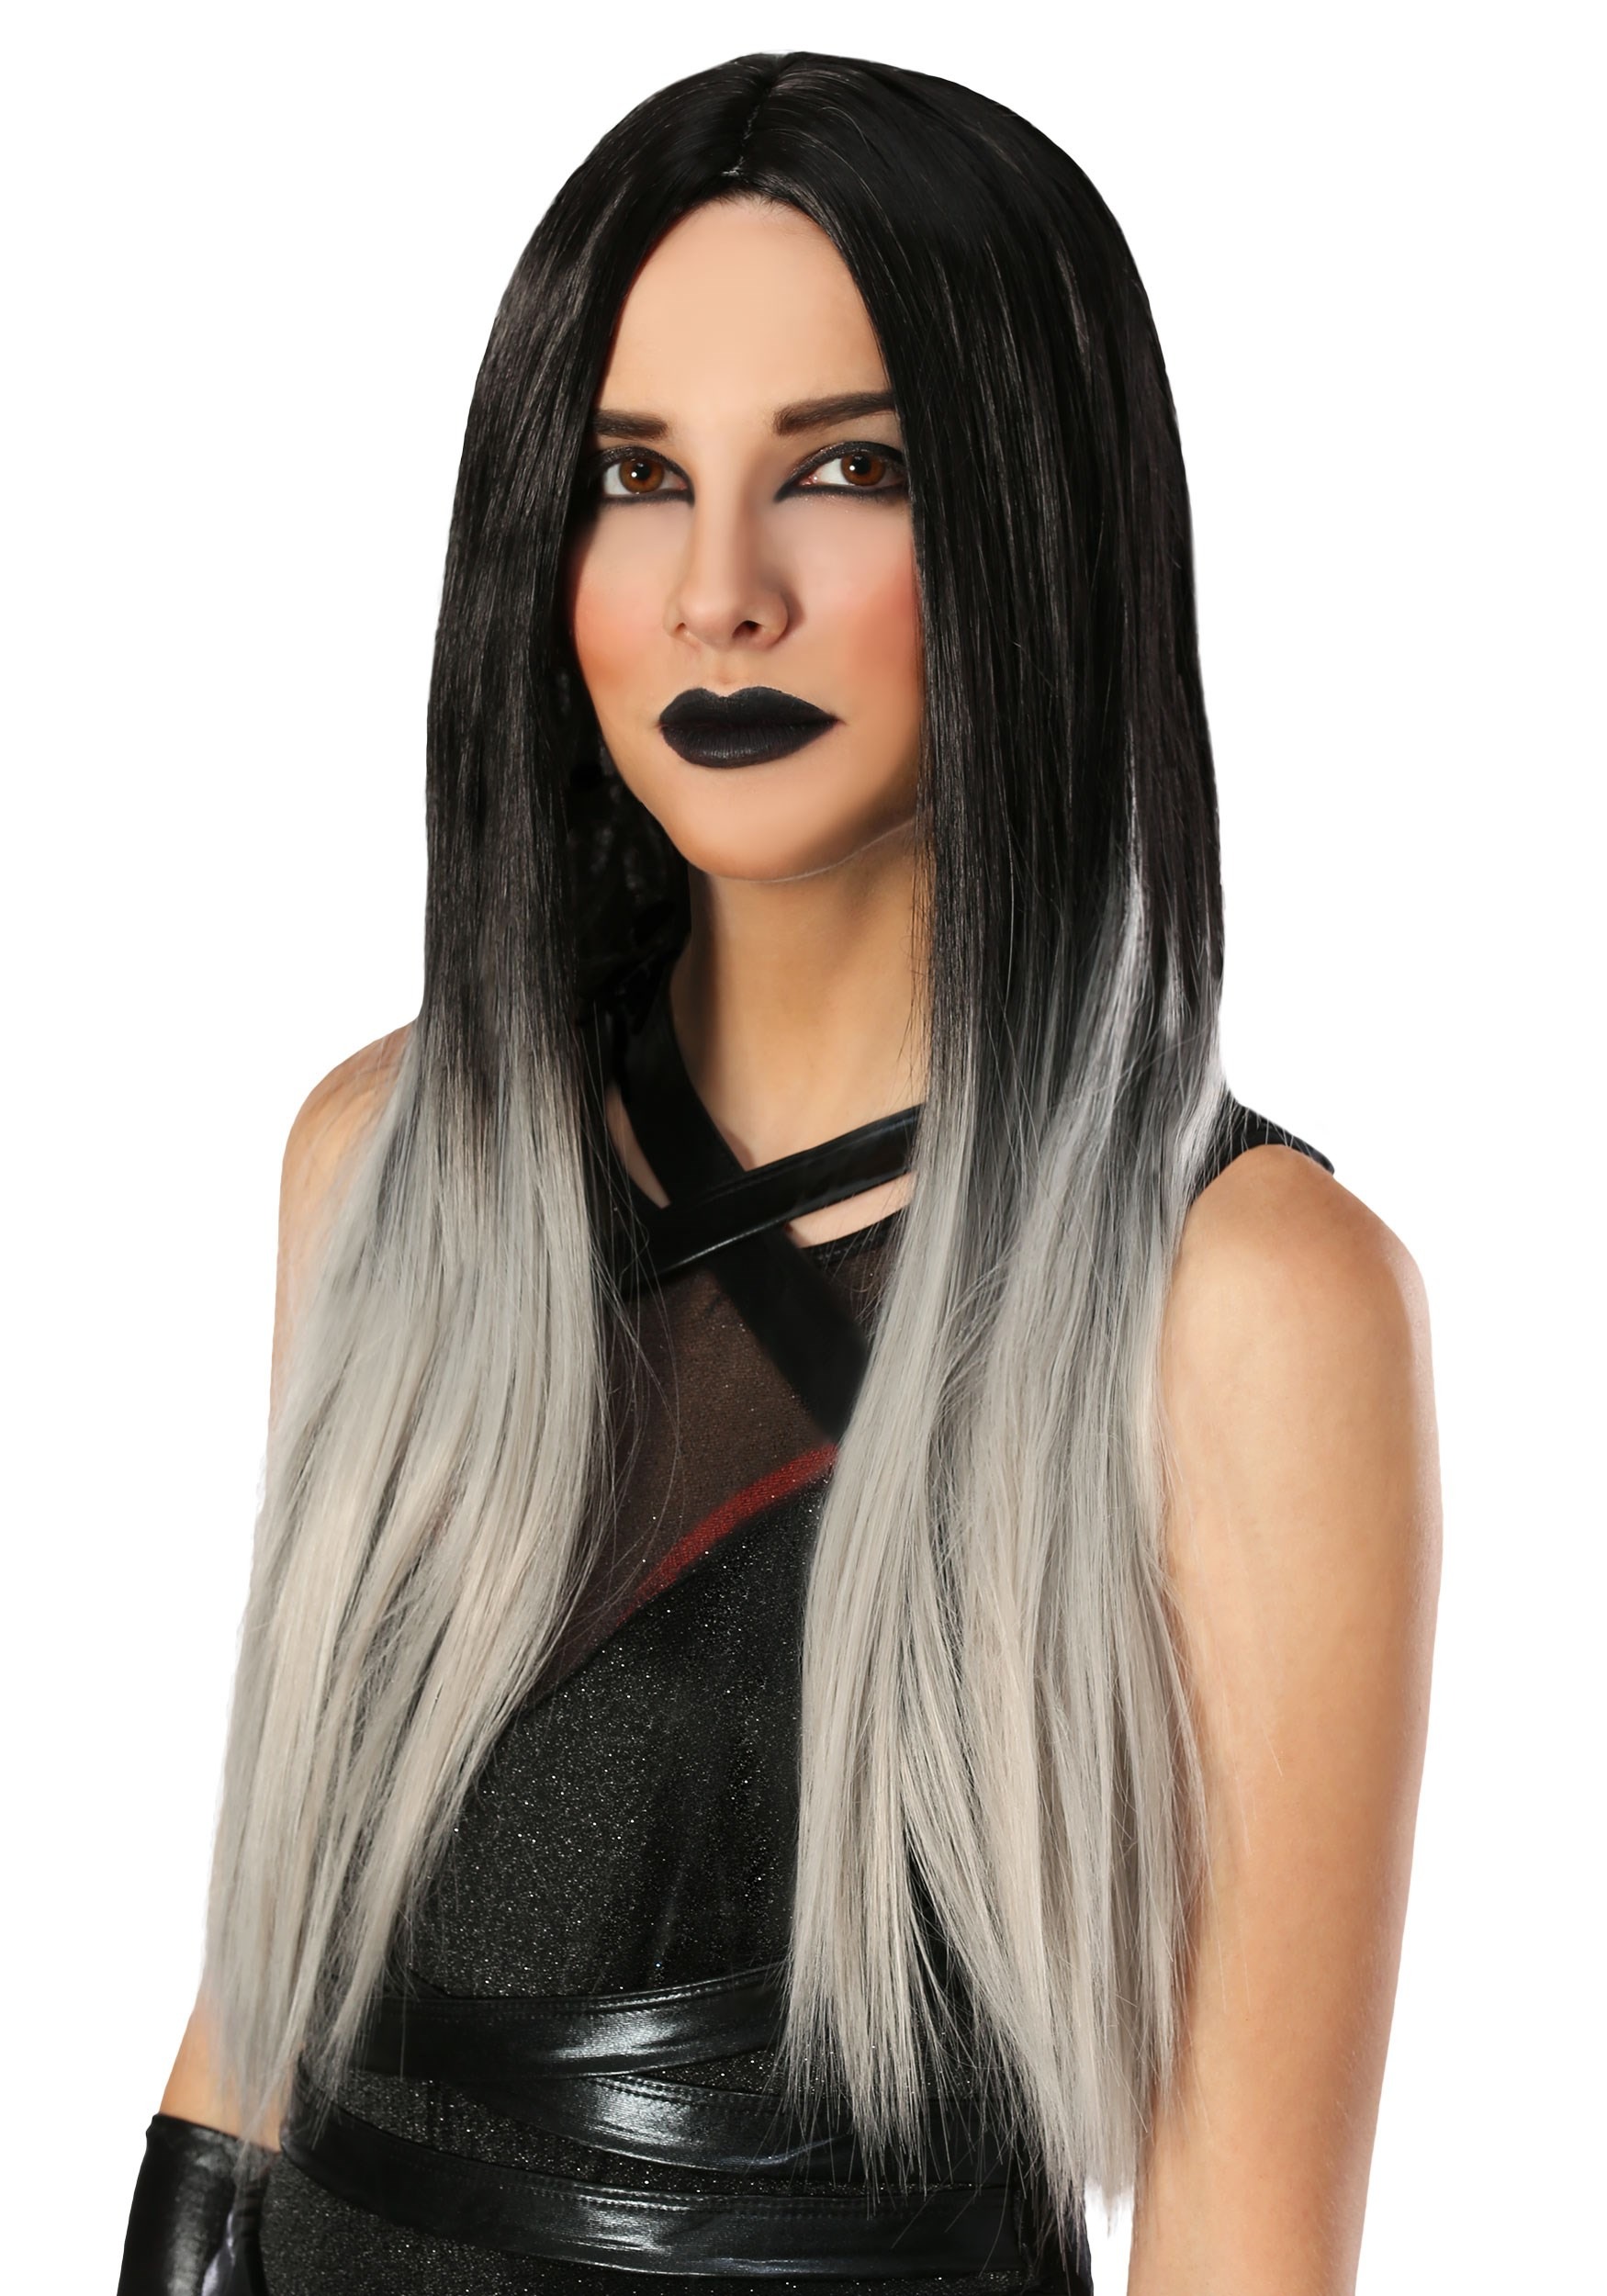 https://images.halloweencostumes.eu/products/42279/1-1/womens-black-and-grey-ombre-wig.jpg